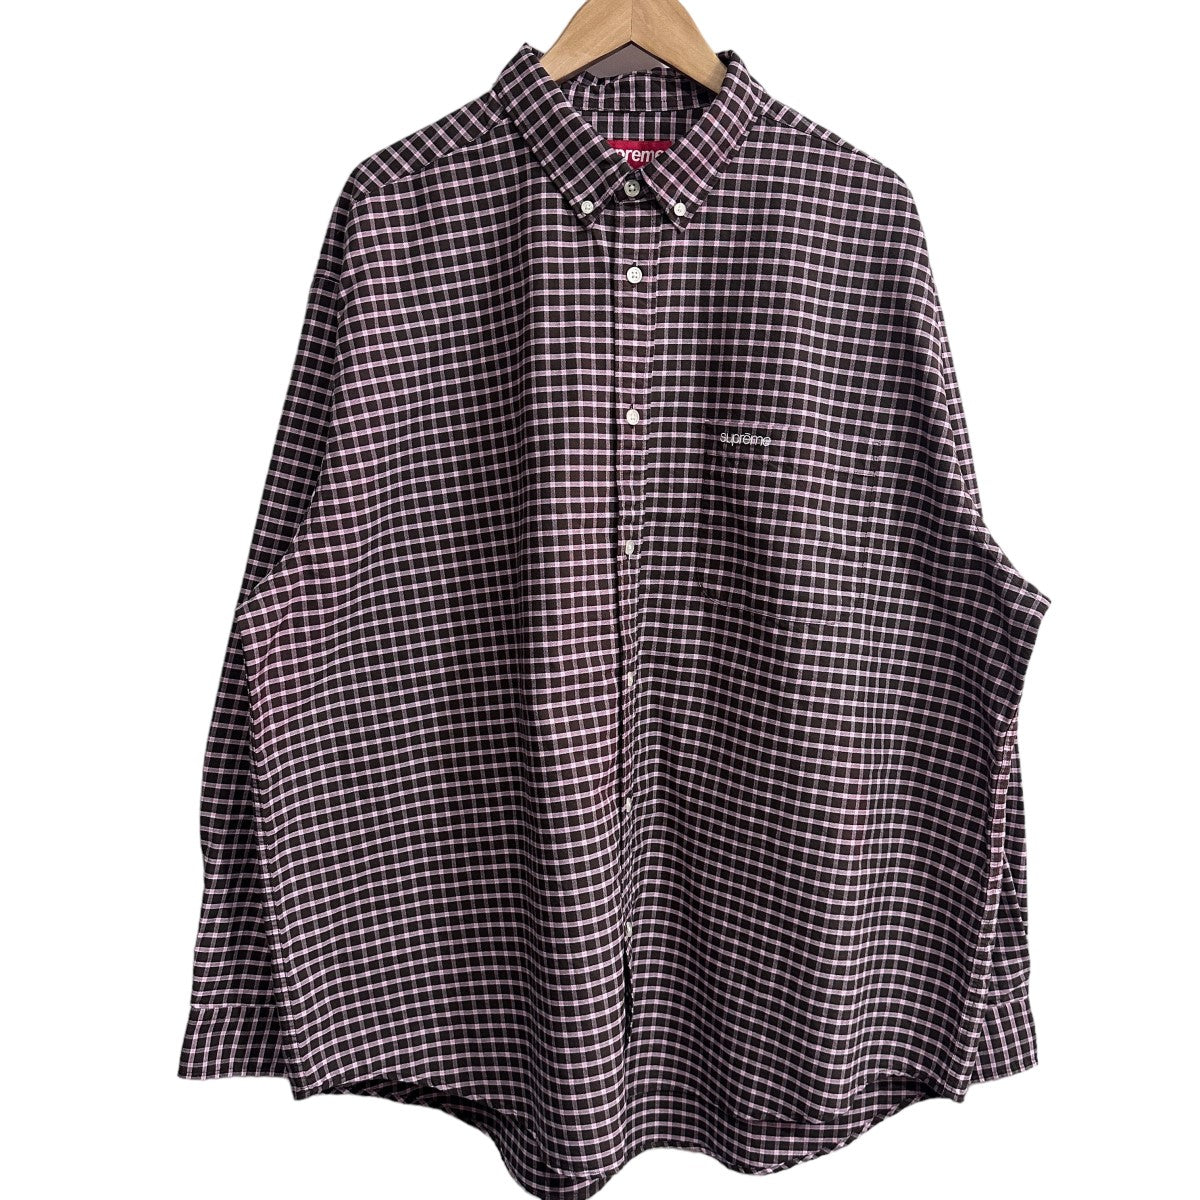 COLOSupreme 23AW Loose Fit Oxford Shirt シャツ